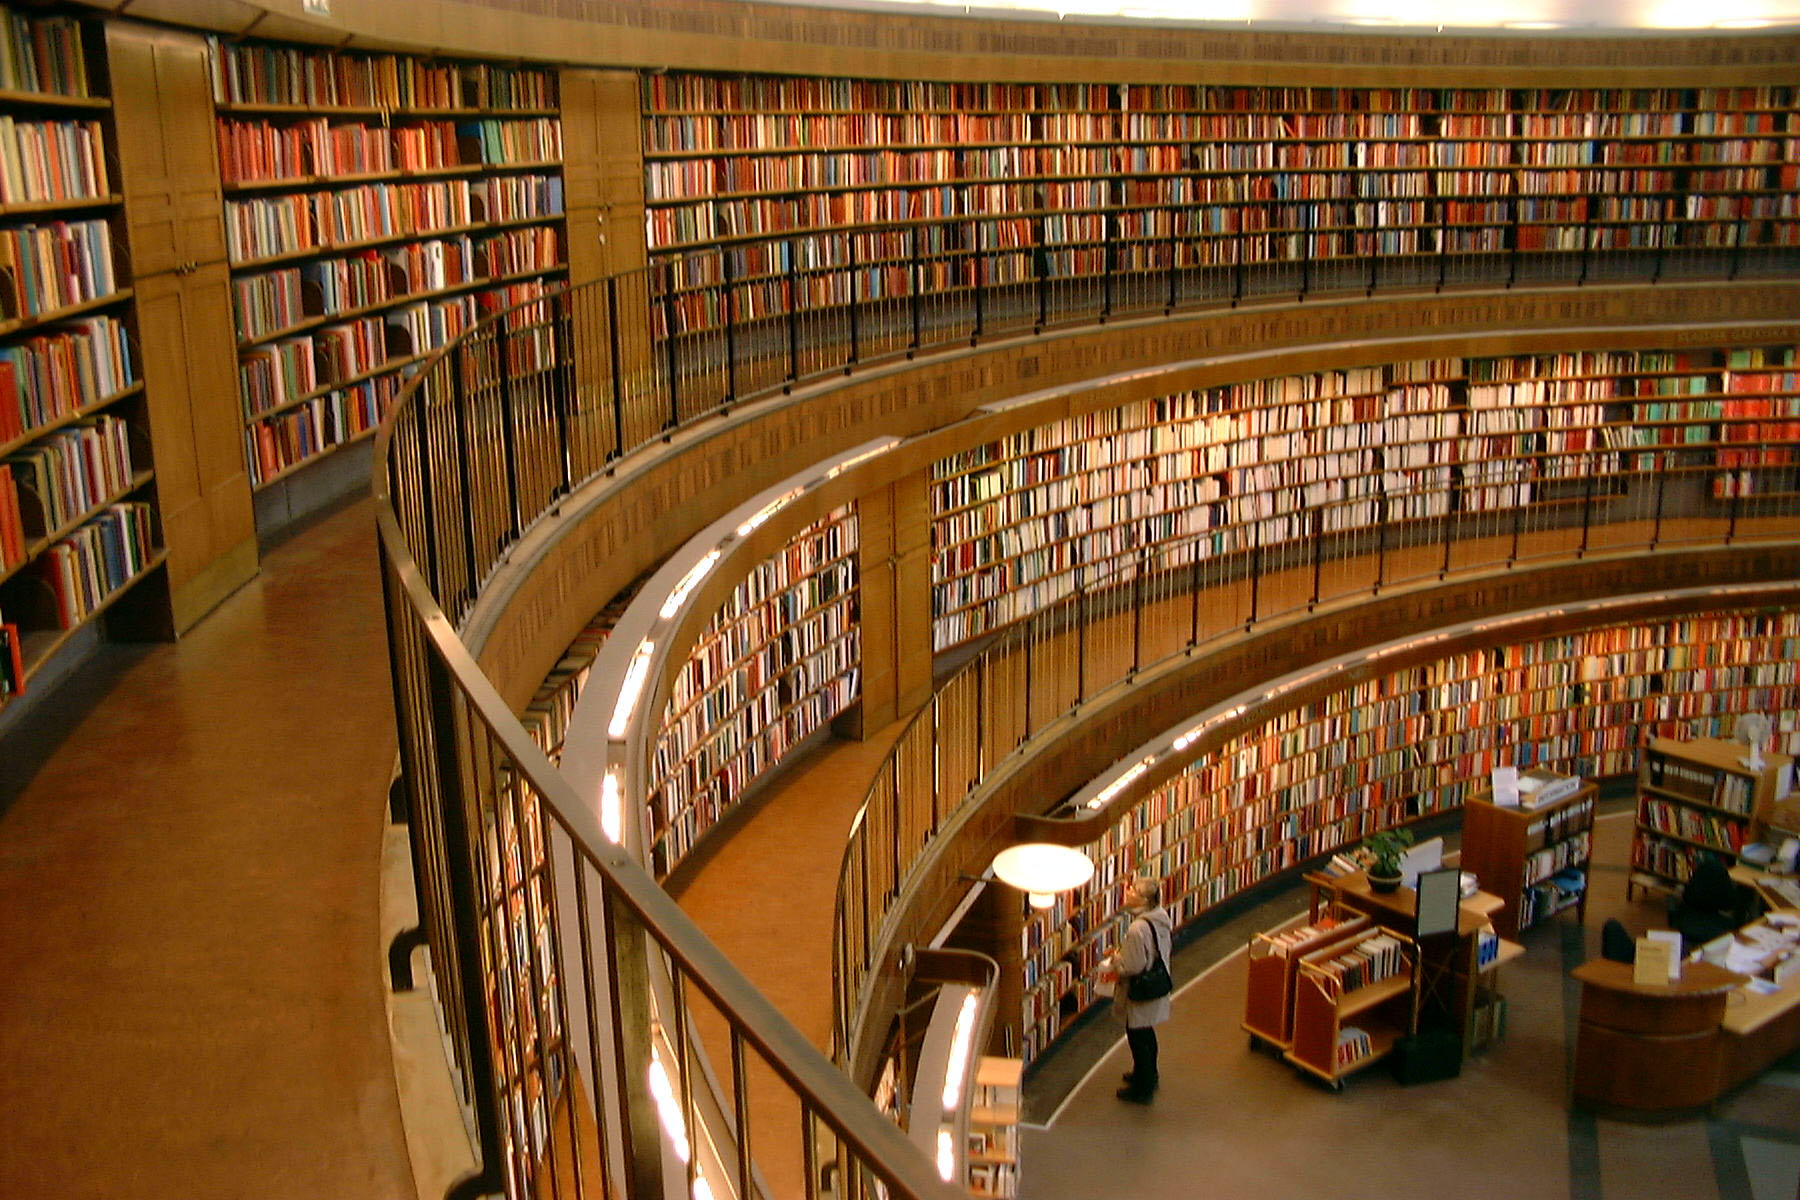 File:Interior view of Stockholm Public Library.jpg - Wikimedia Commons